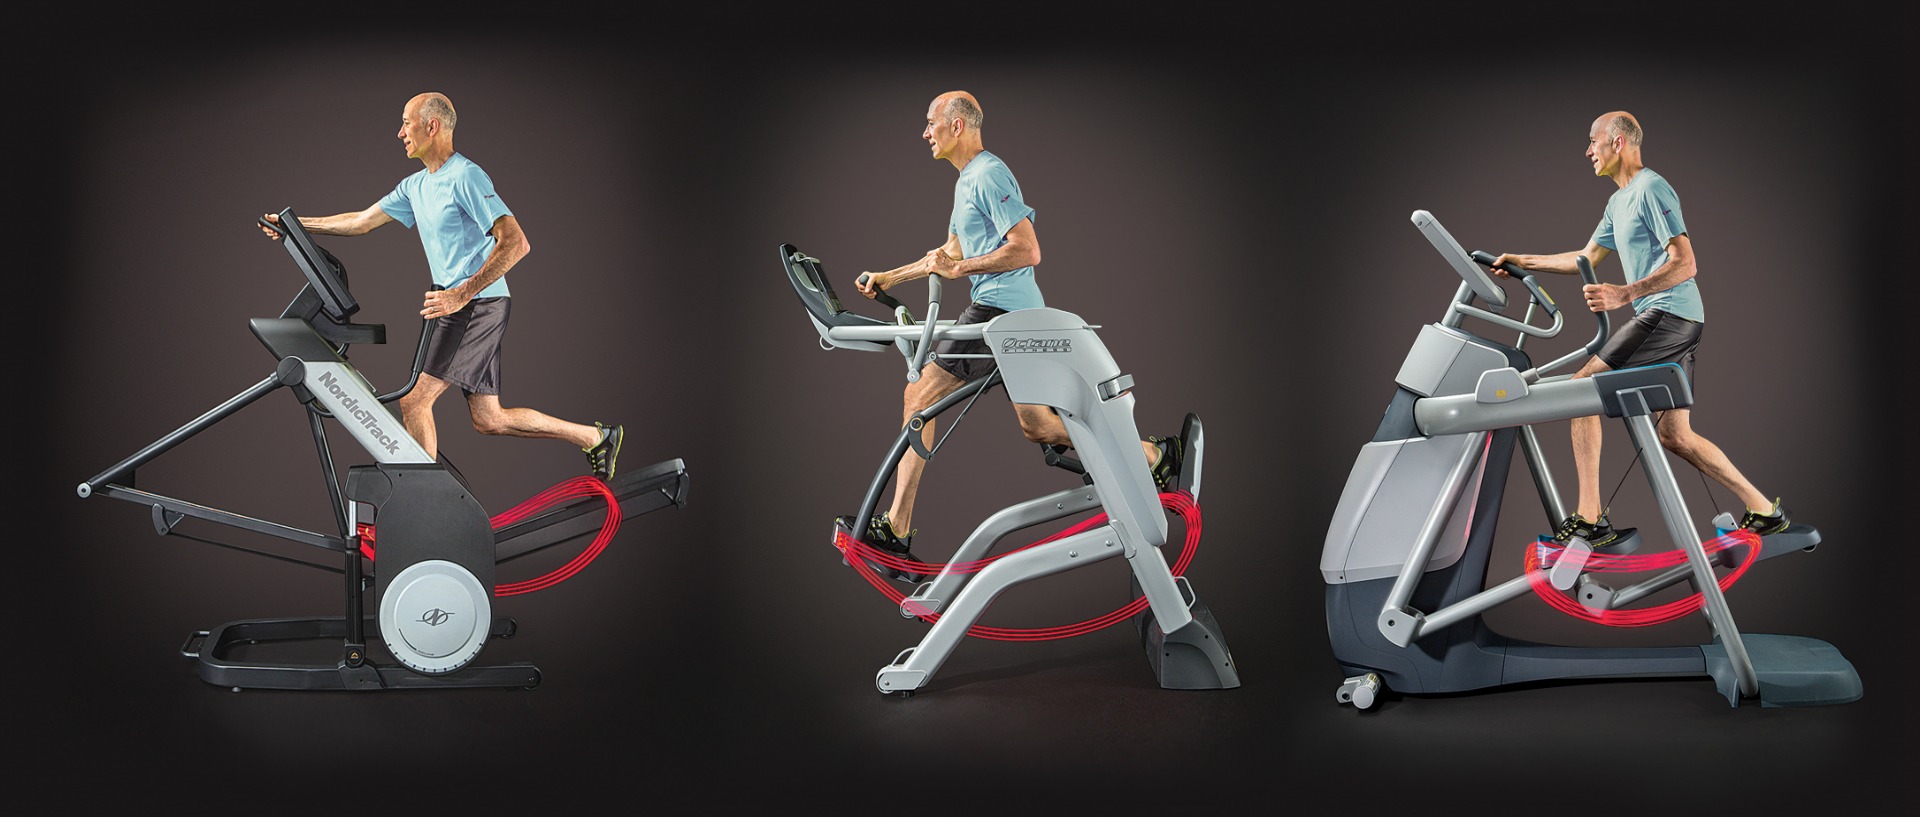 How to Find the Right Exercise Equipment - Consumer Reports